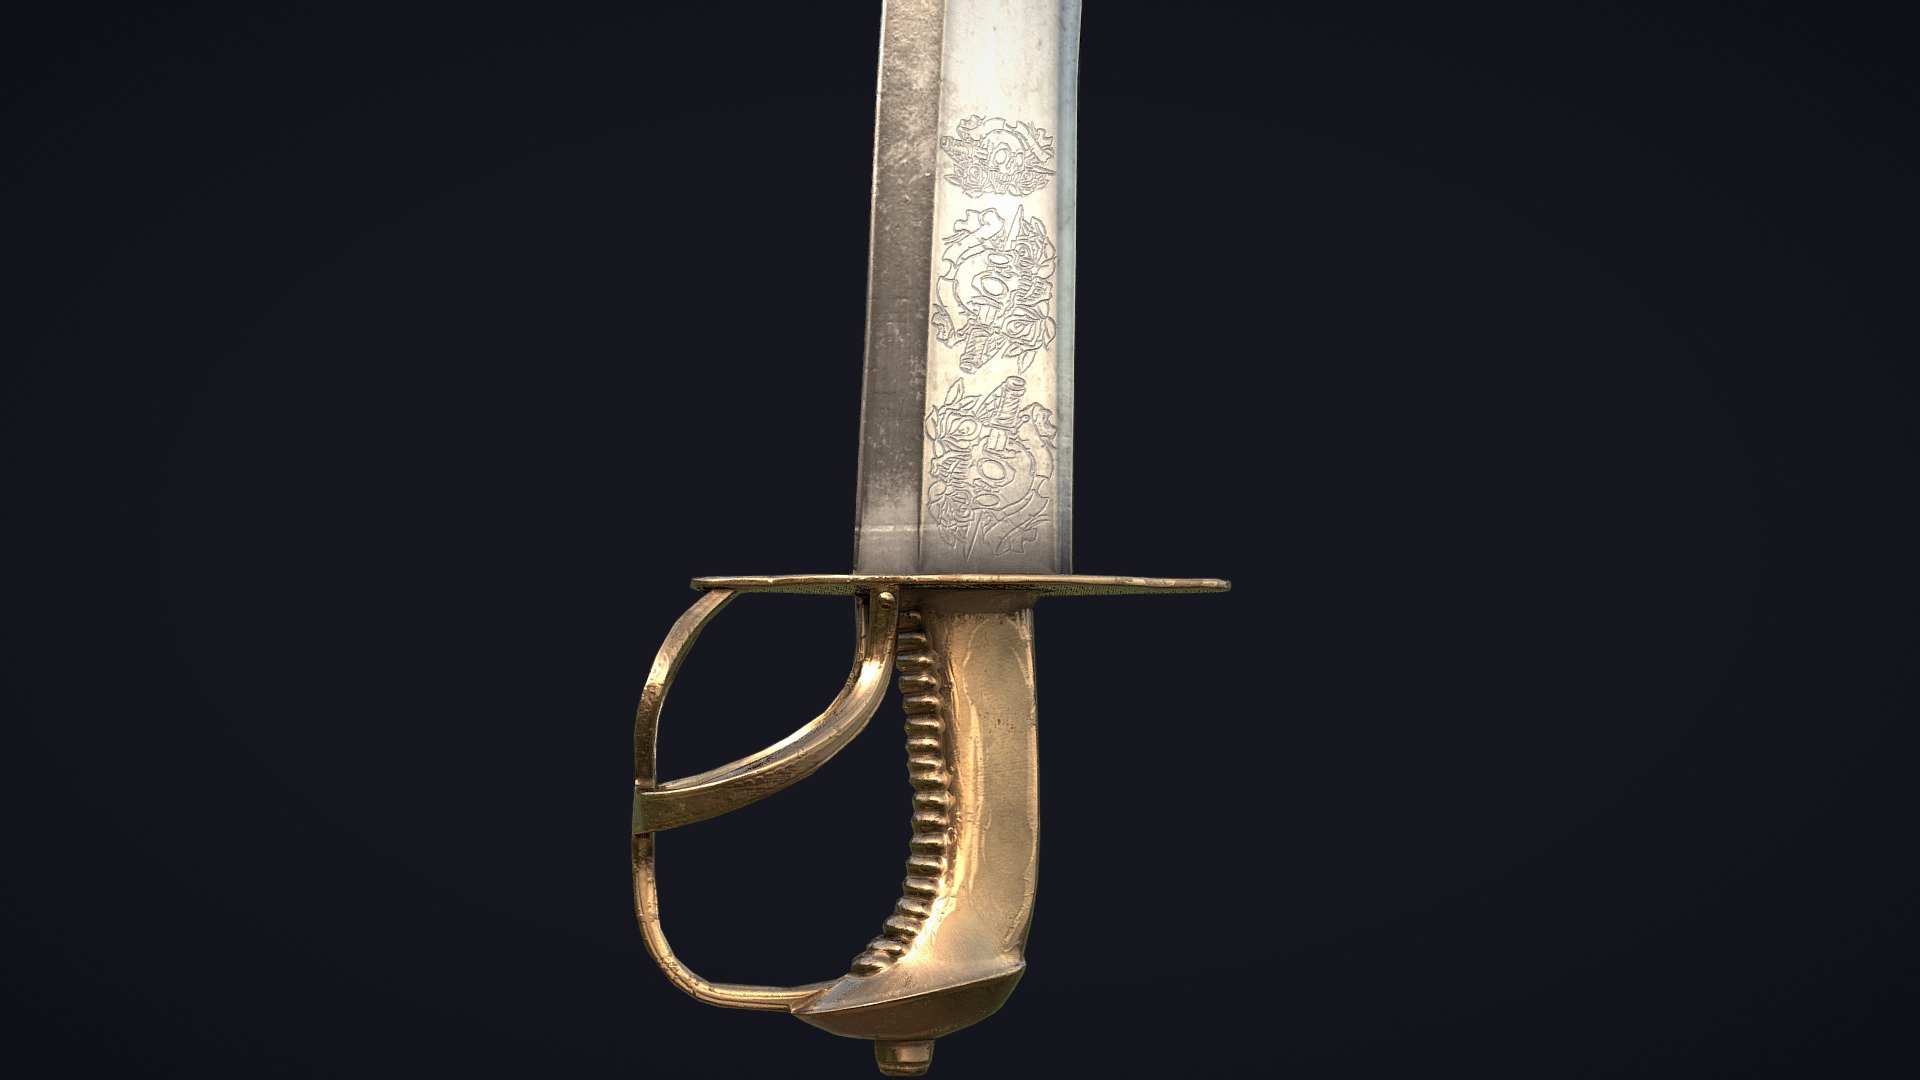 A cutlass is a short, broad sabre or slashing sword, with a straight or slightly curved blade sharpened on the cutting edge, and a hilt often featuring a solid cupped or basket-shaped guard. It was a common naval weapon during the Age of Sail 3d model